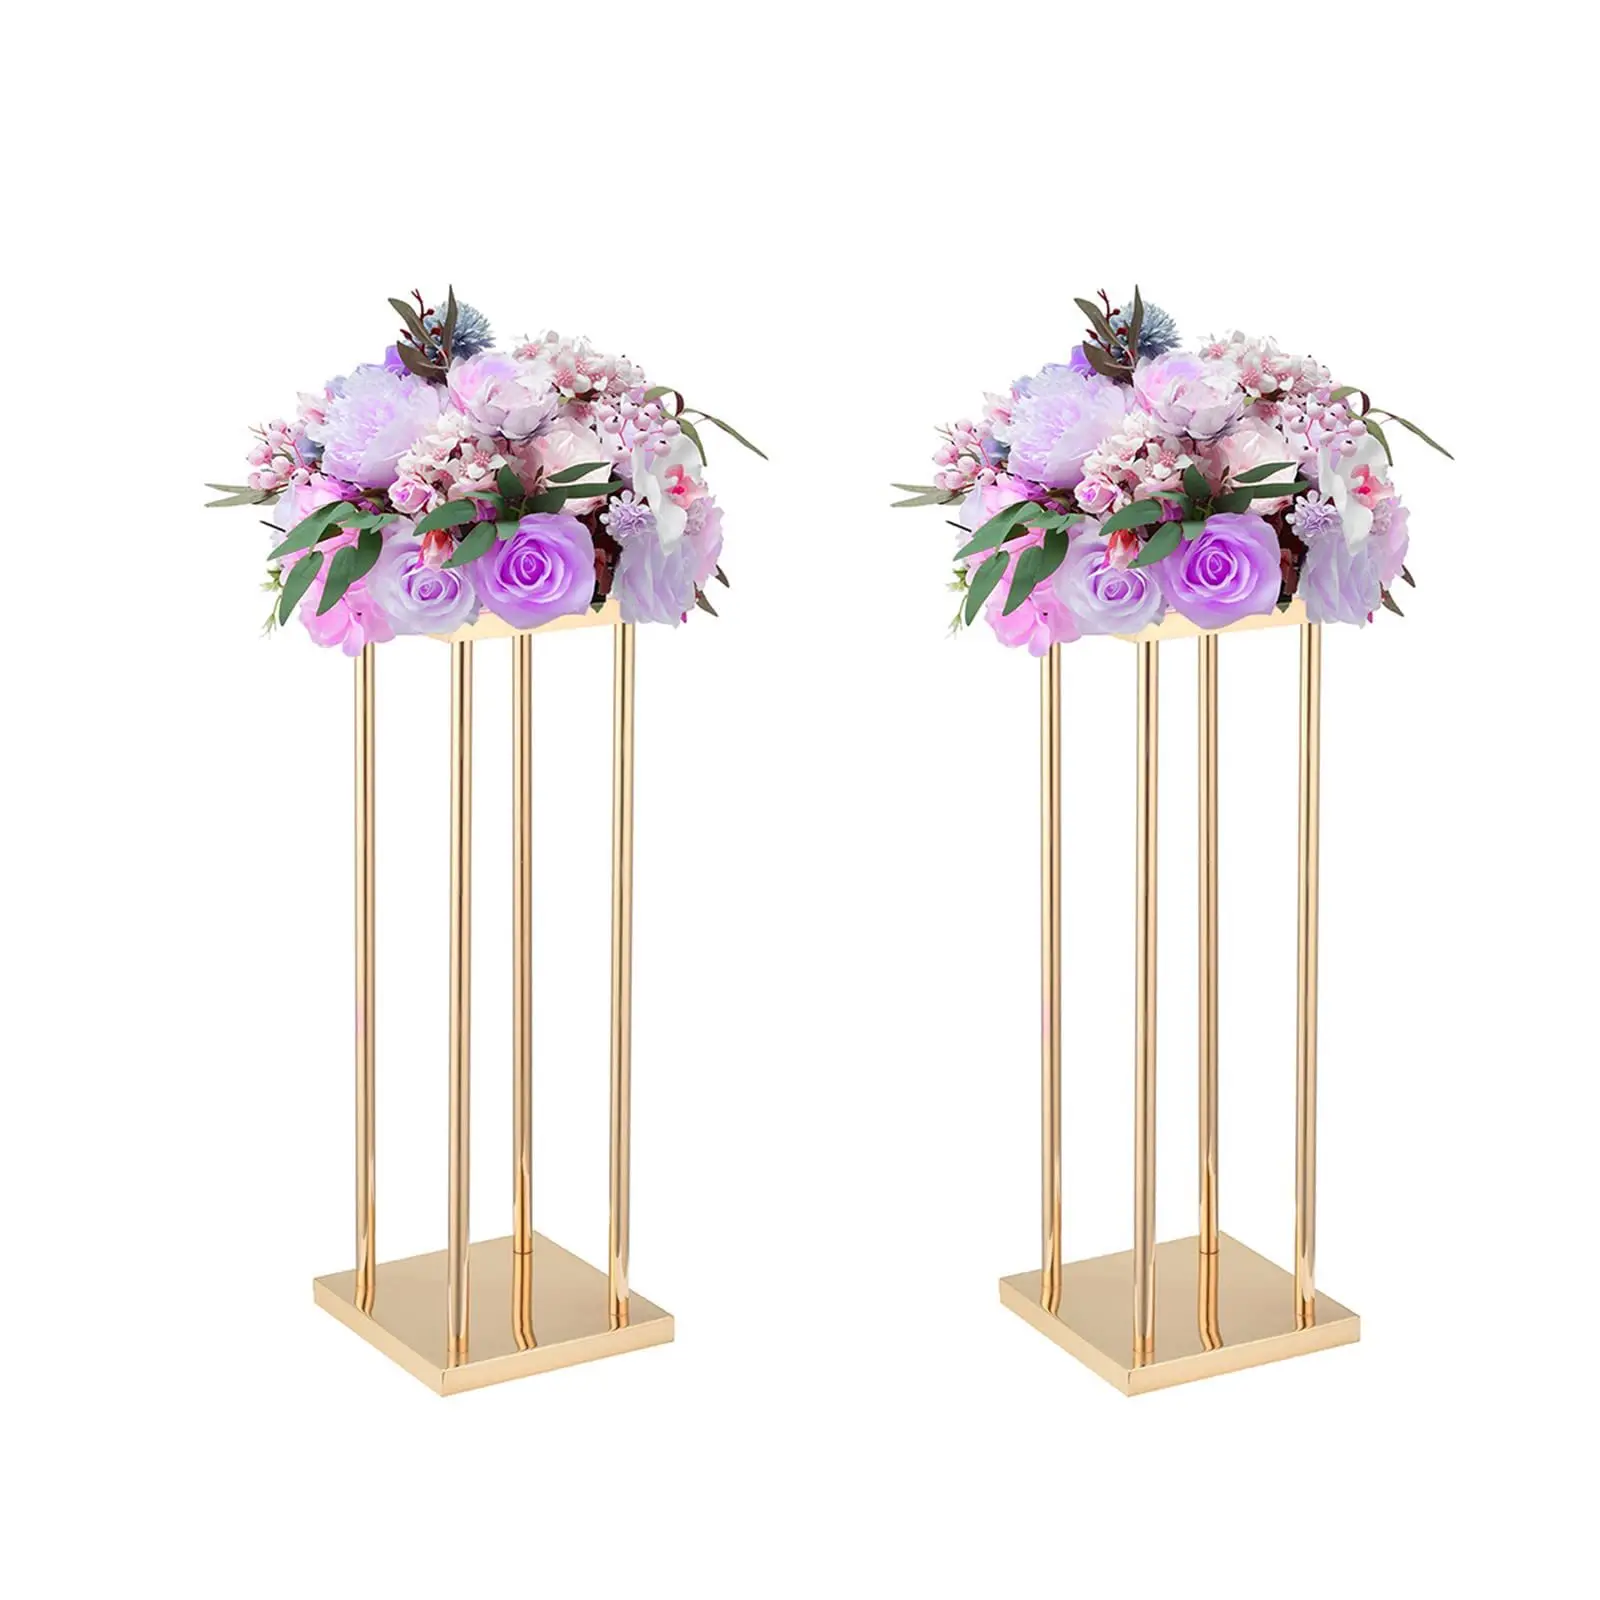 

Tall mirror base gold metal square Wedding Table Centerpieces for pillar flowers stand Floor Geometric Vases decoration